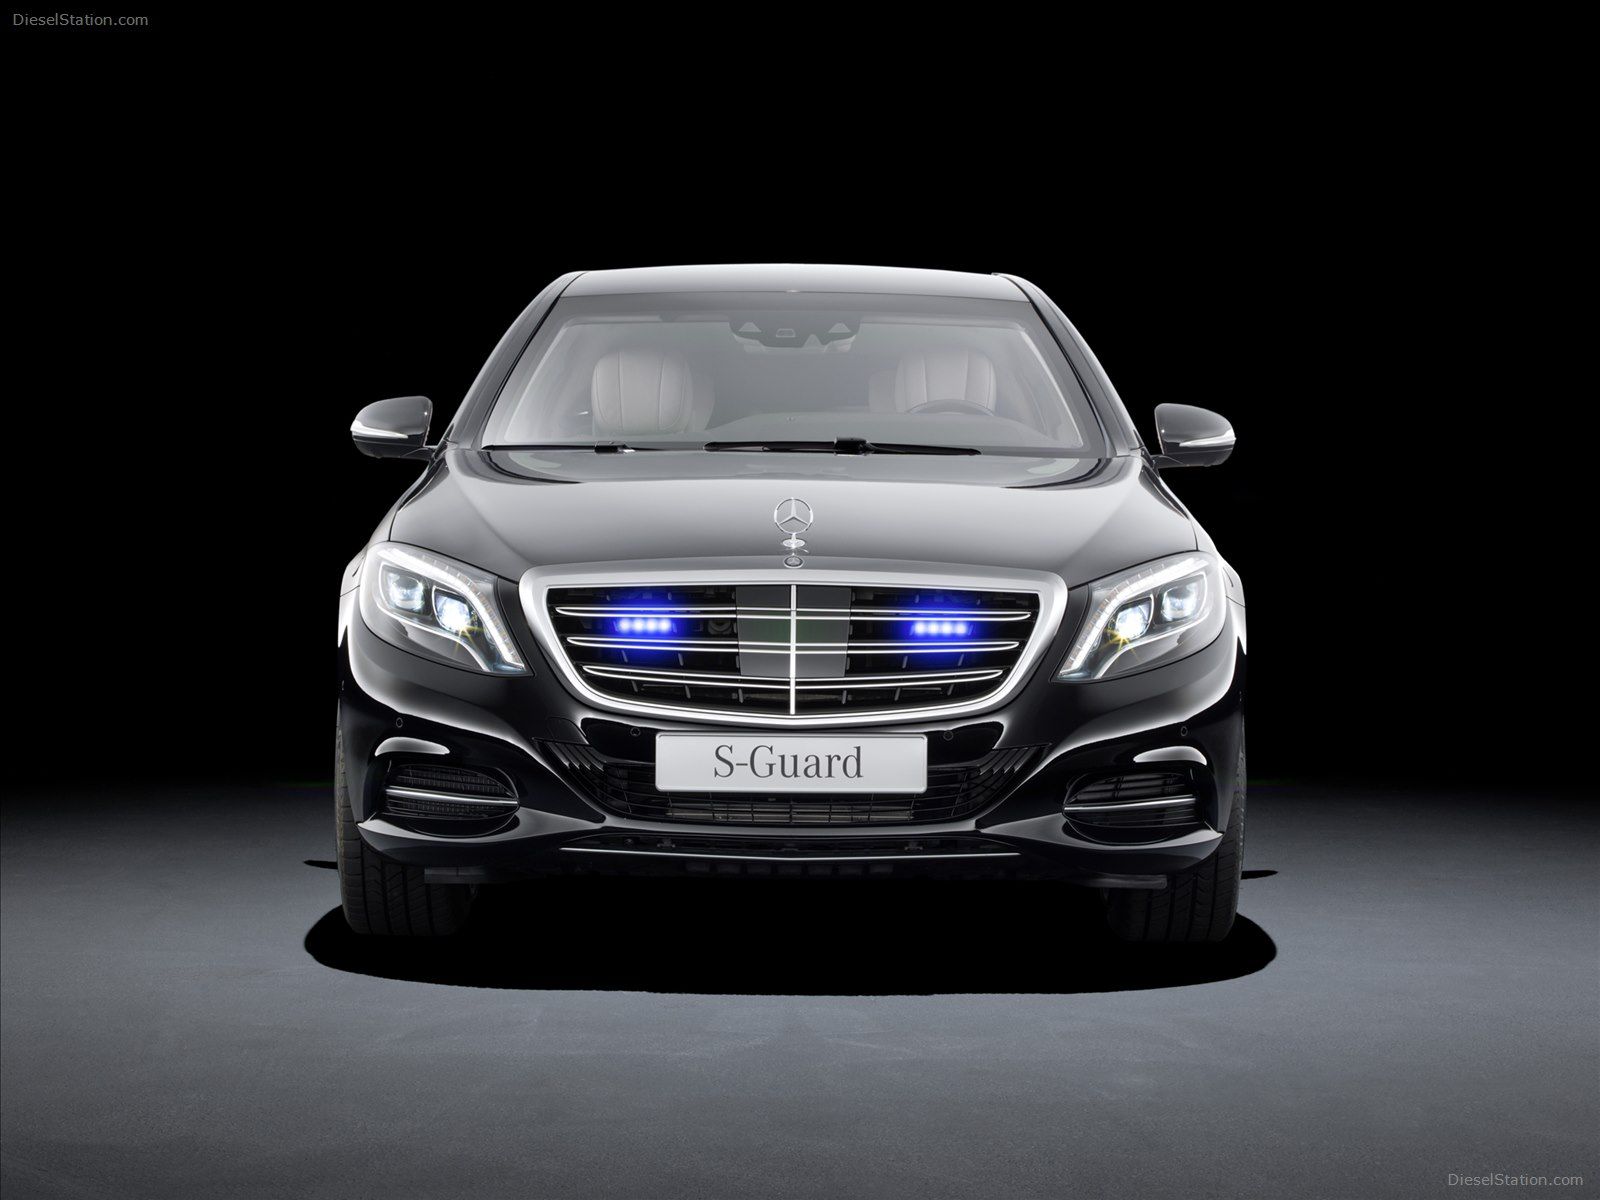 Classy Mercedes S Class Wallpaper To Give Your Screen Lavish